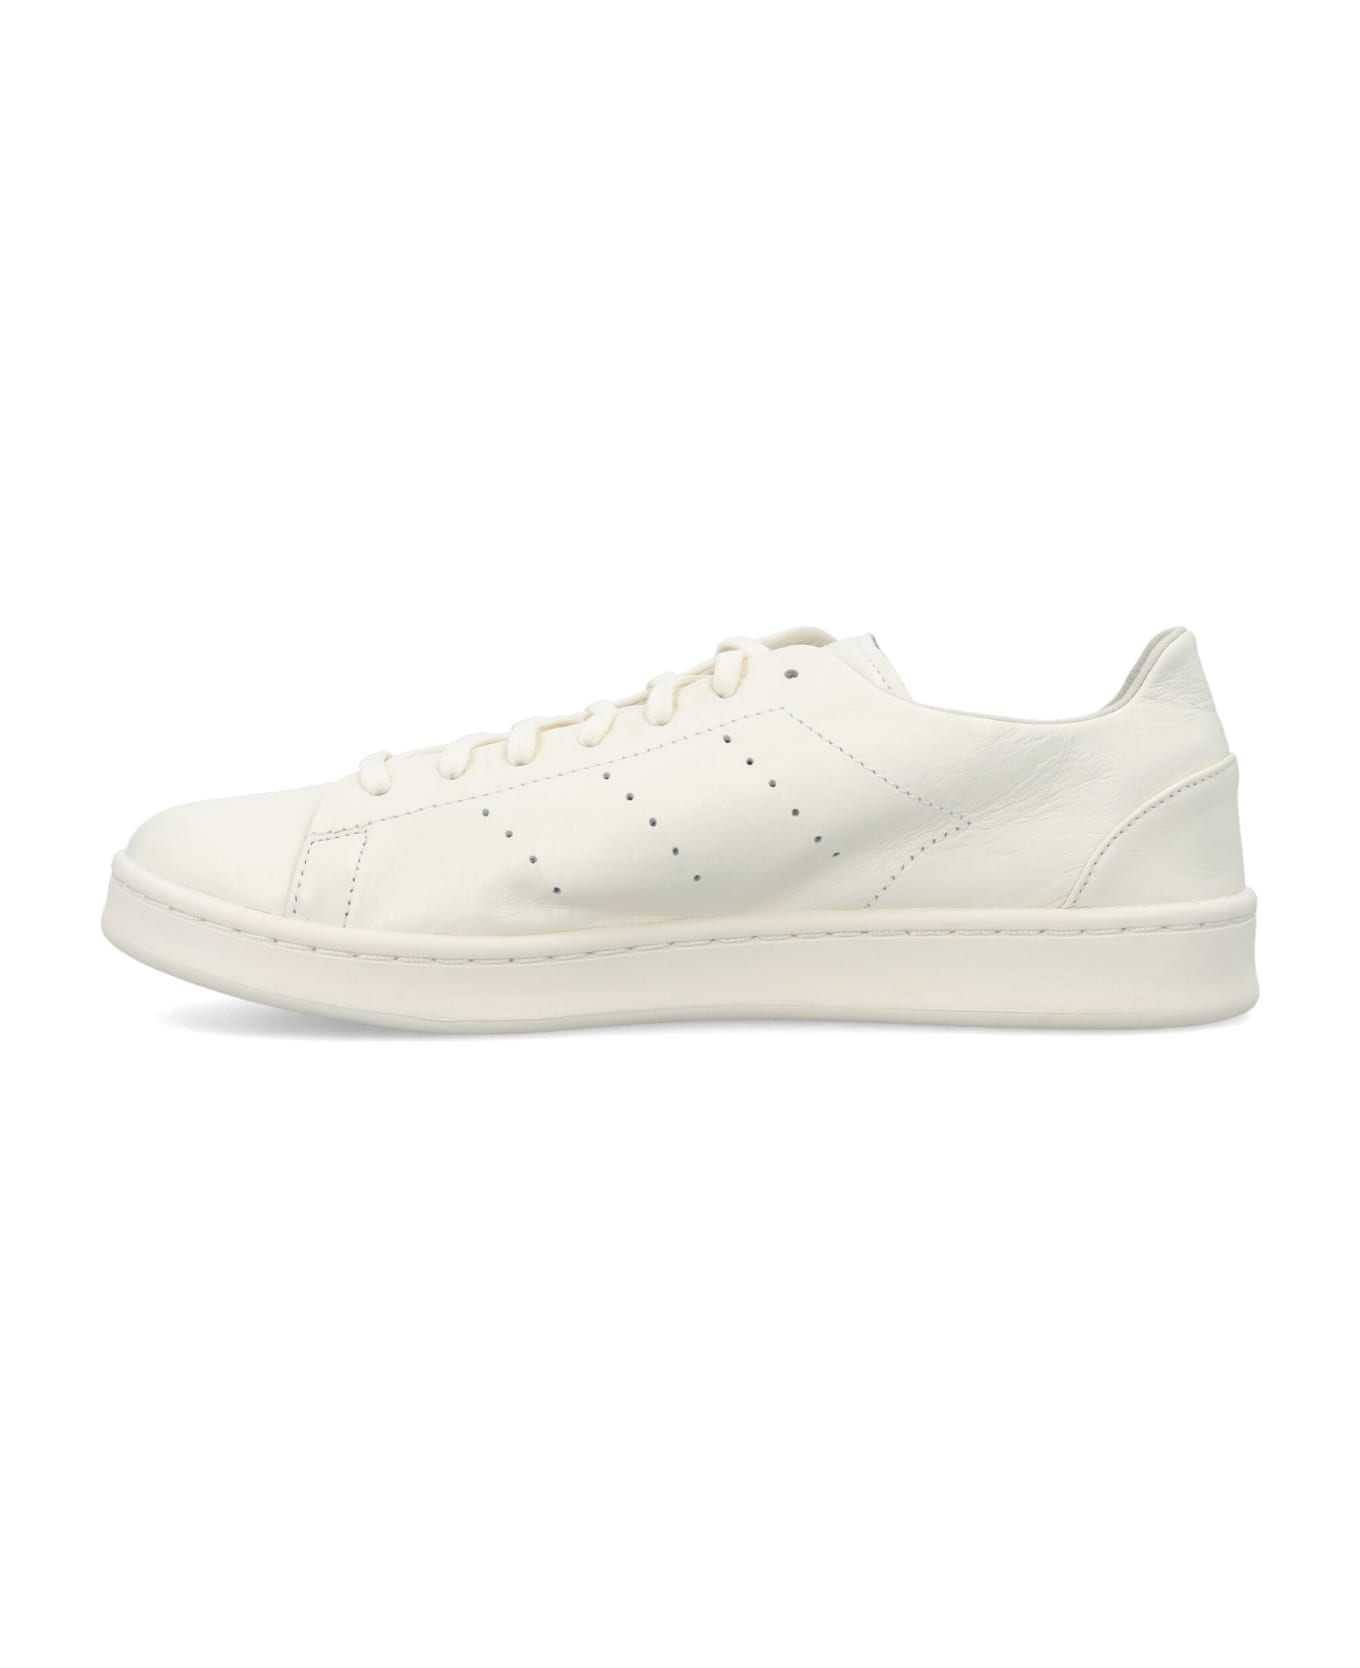 Y-3 Stan Smith Sneakers - WHITE